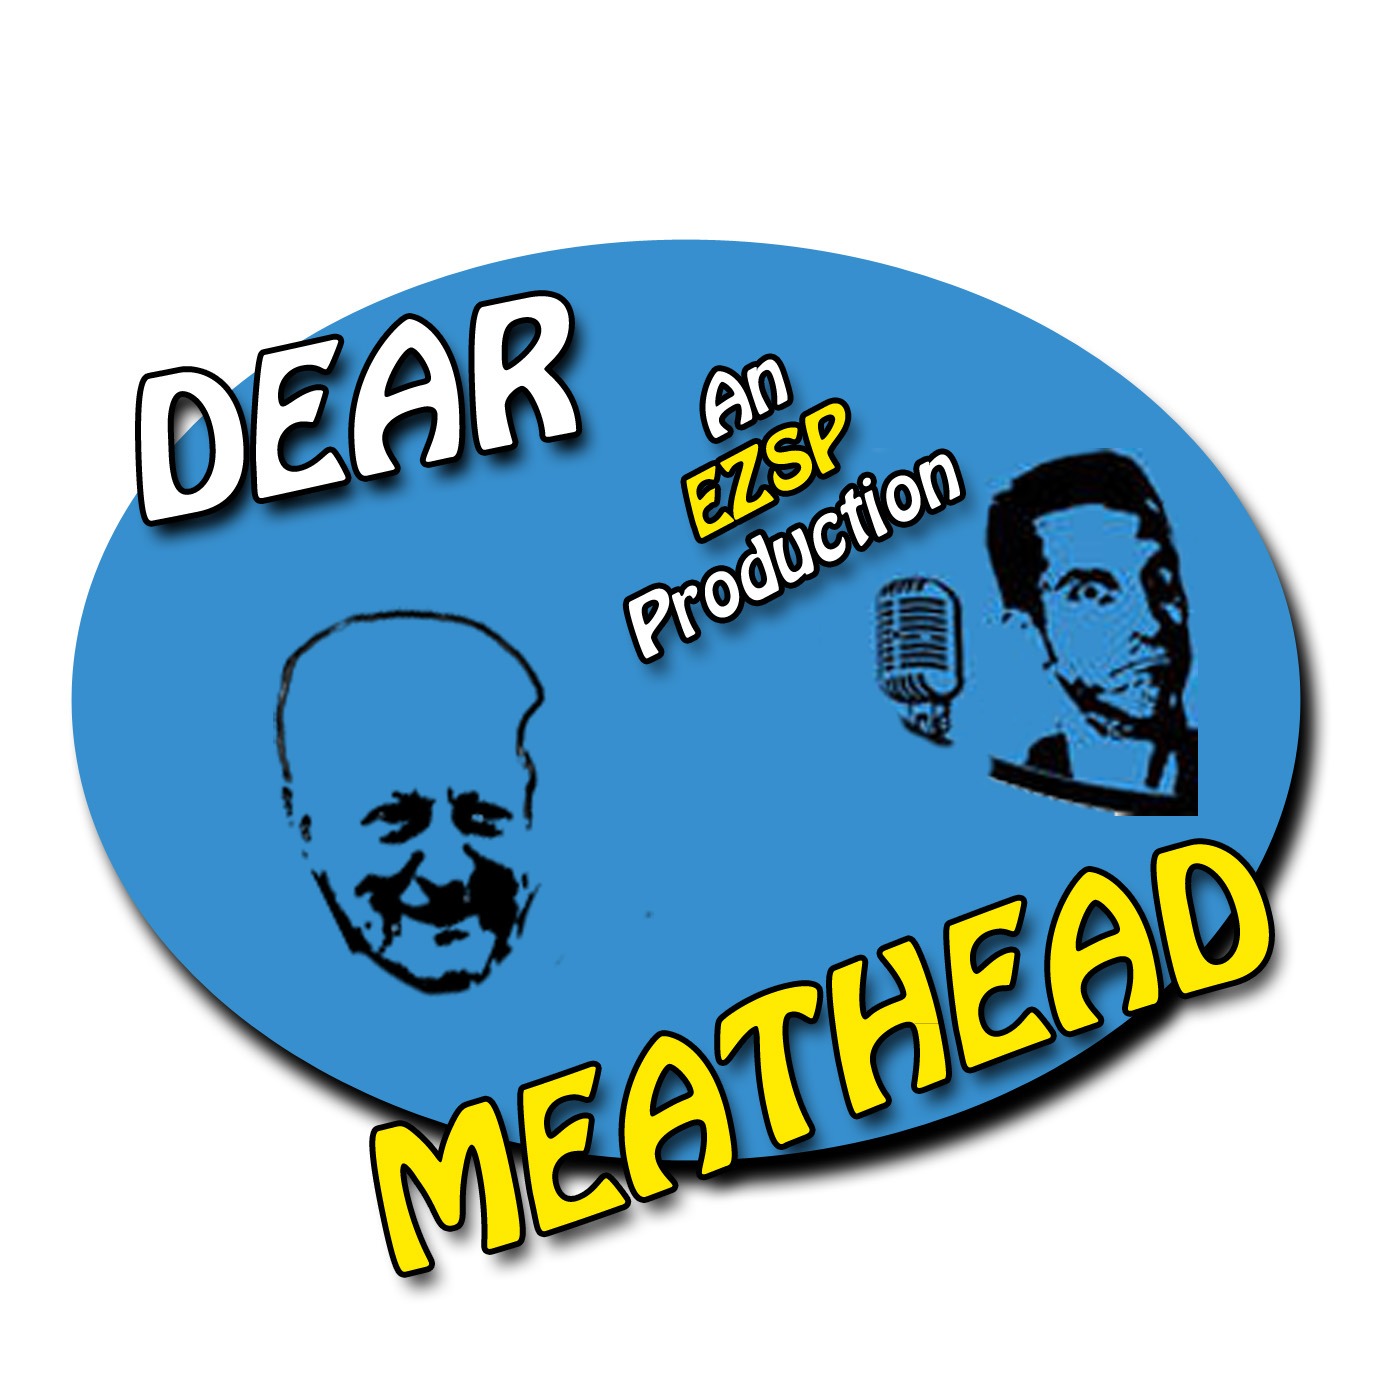 Dear Meathead Highlight - Dad on kids who draw penises and a reunion of sorts